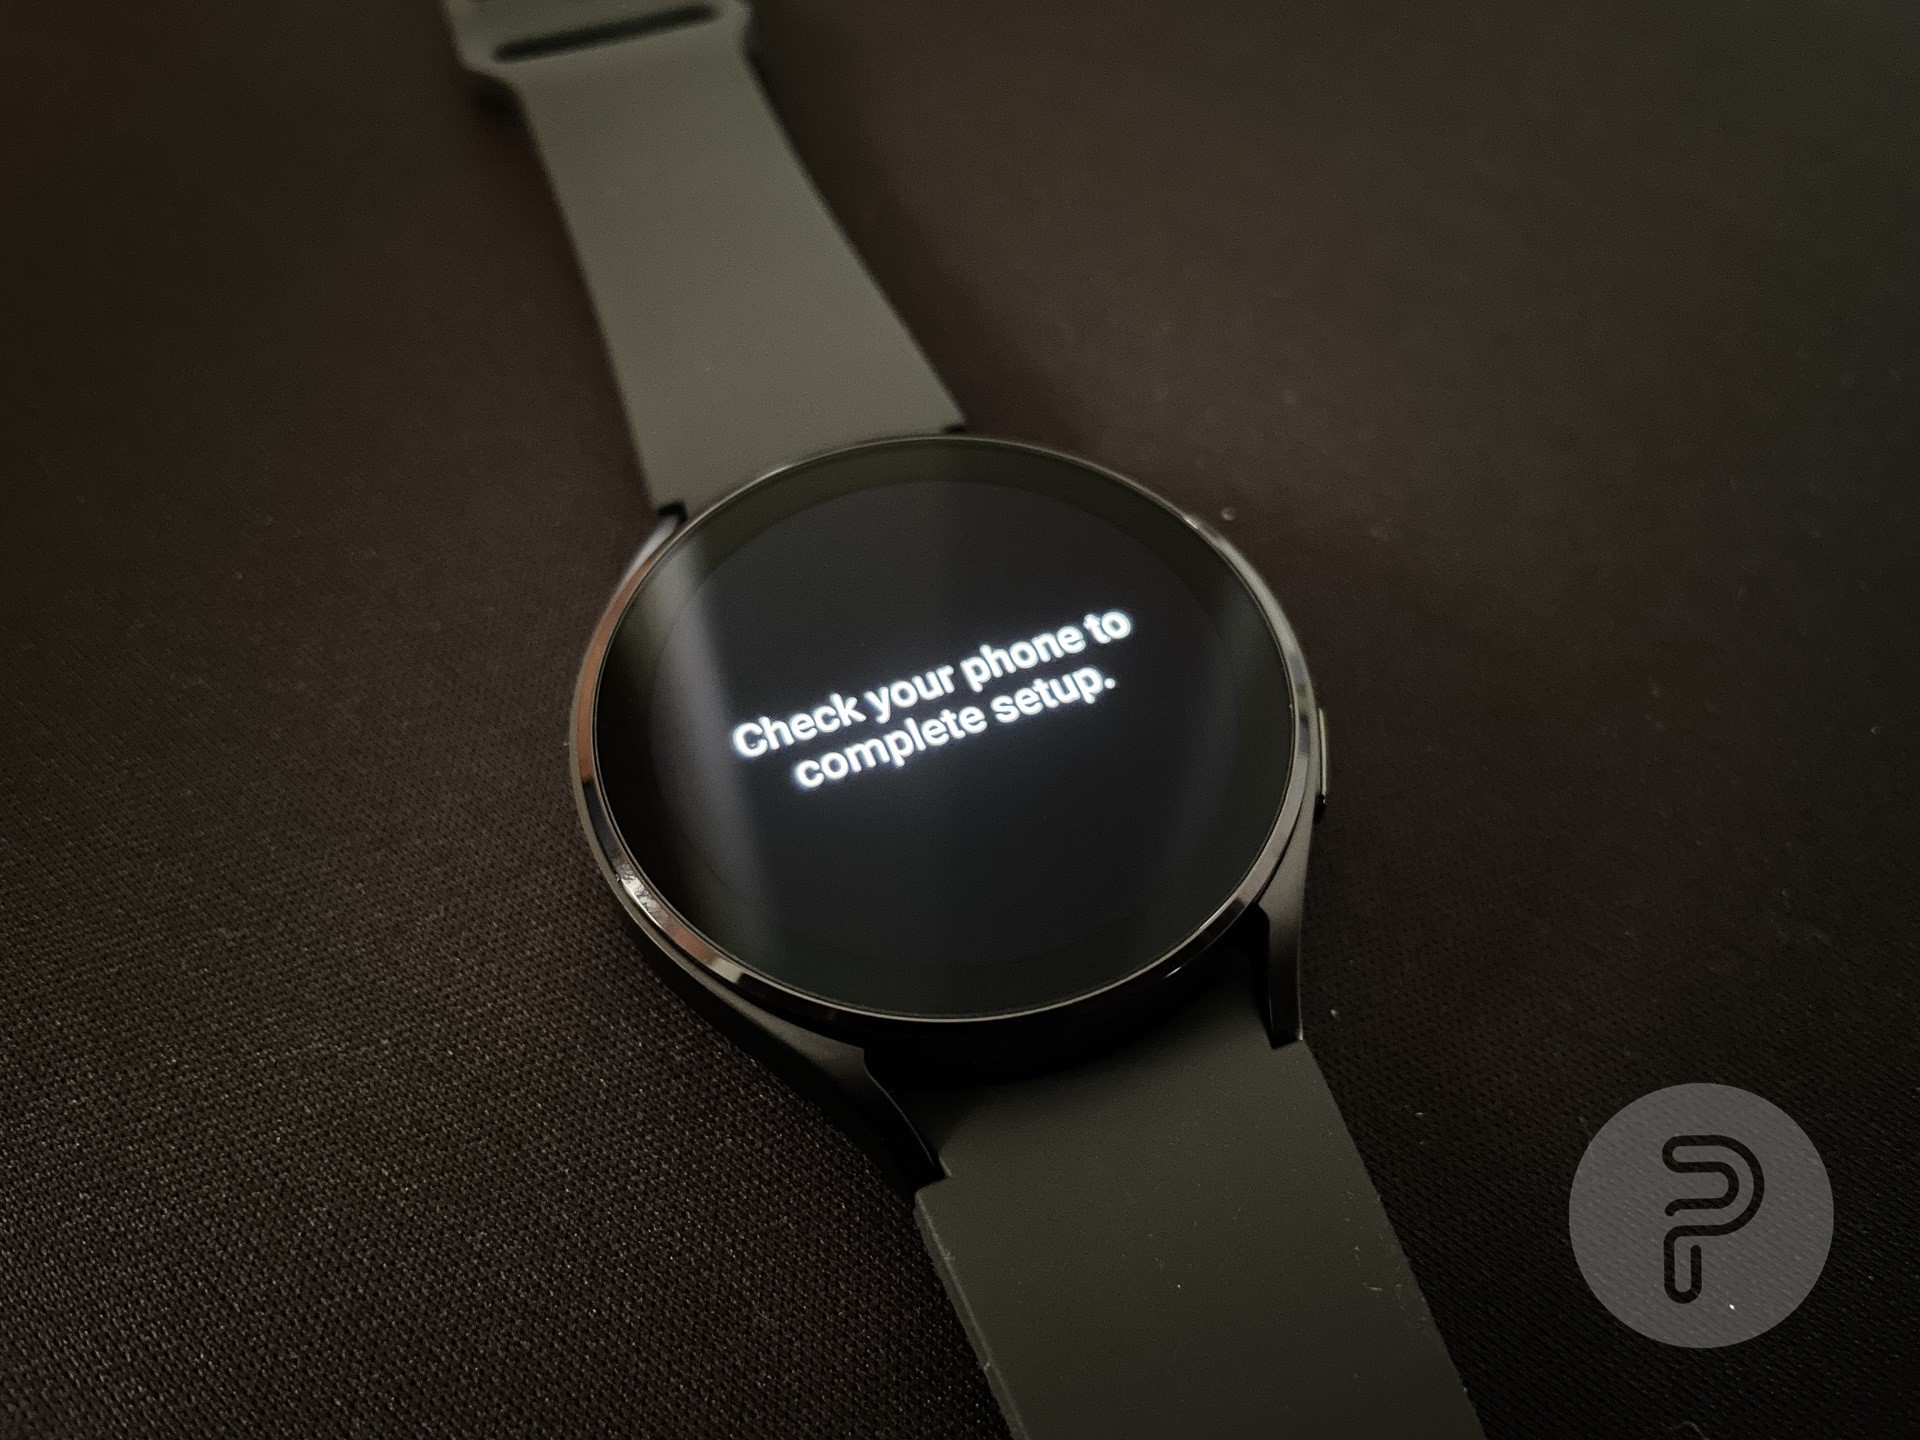 How to set up Google Assistant on Galaxy Watch 4?